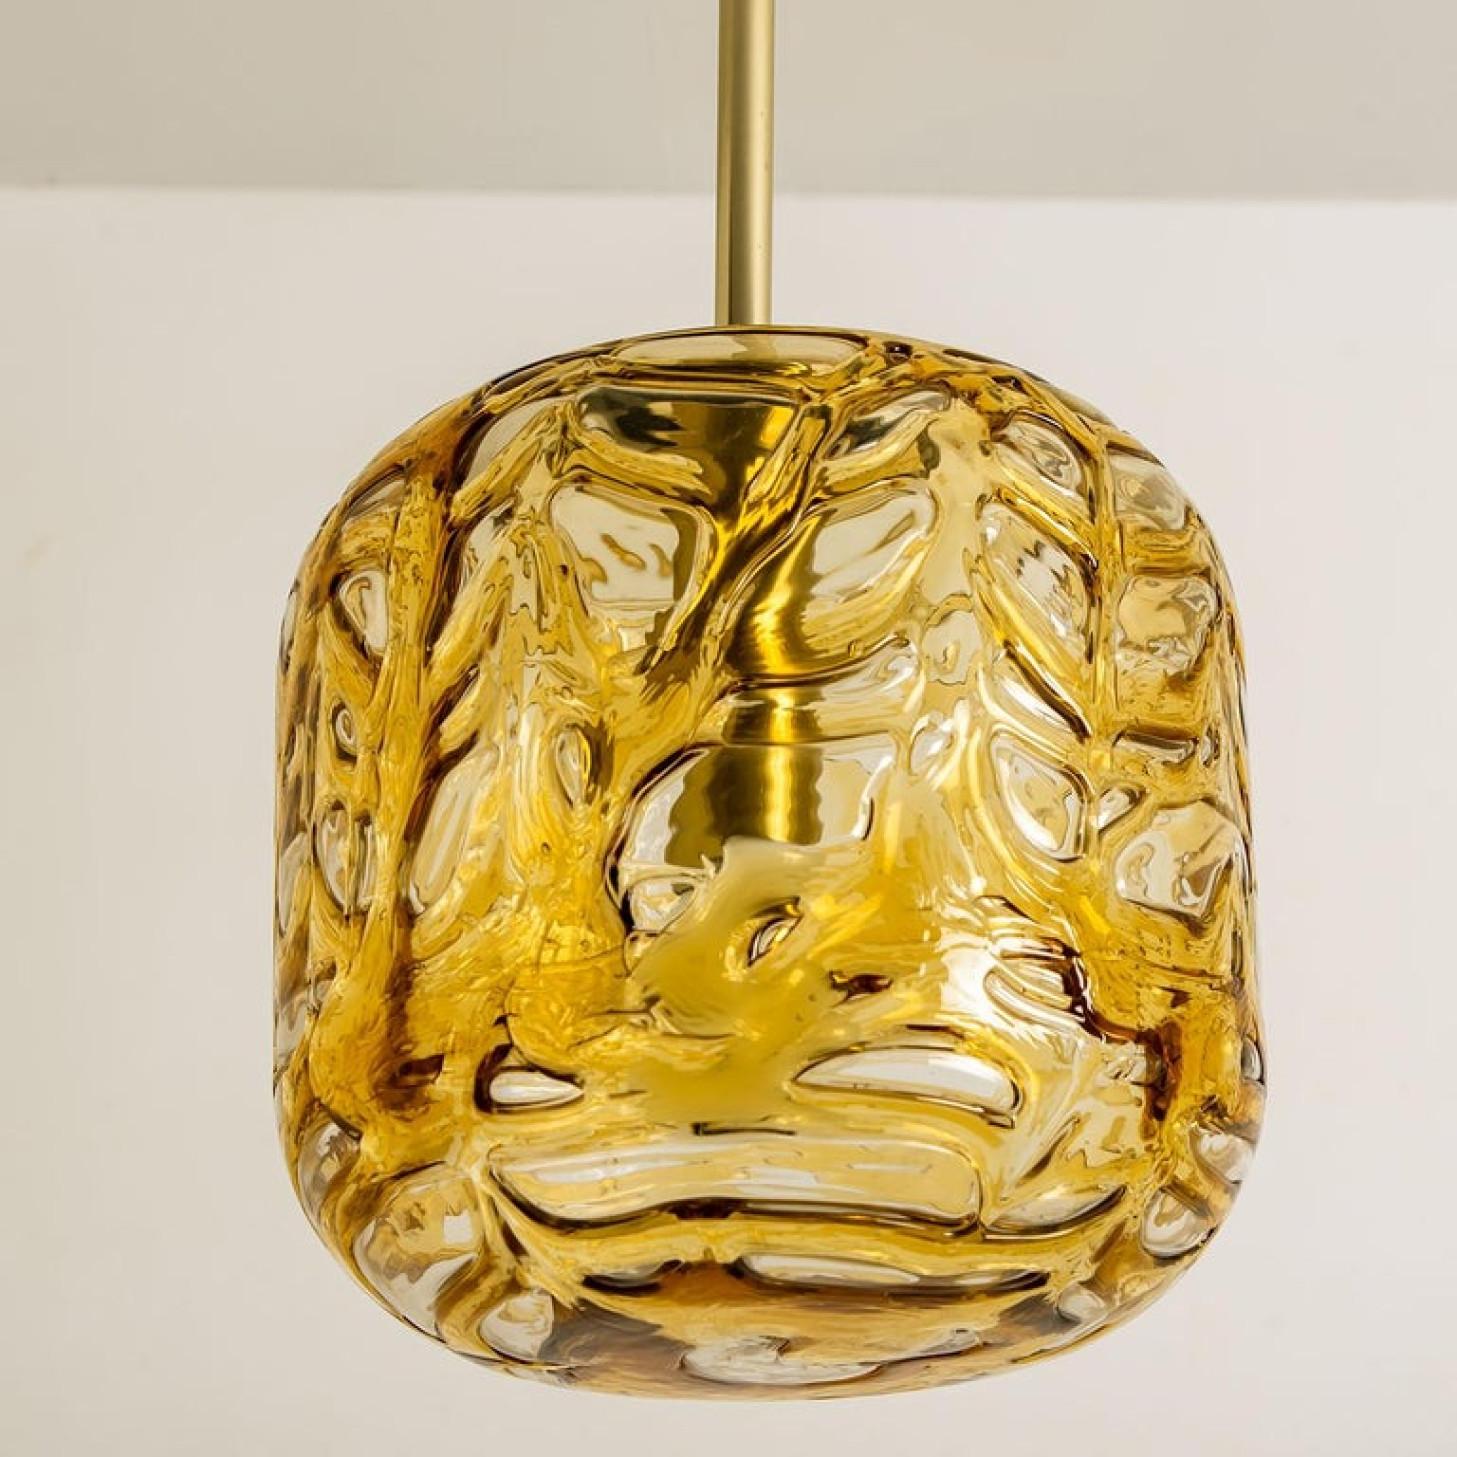 Exceptional Pair of Amber Murano Glass Pendant Lights Venini Style, 1970 For Sale 6